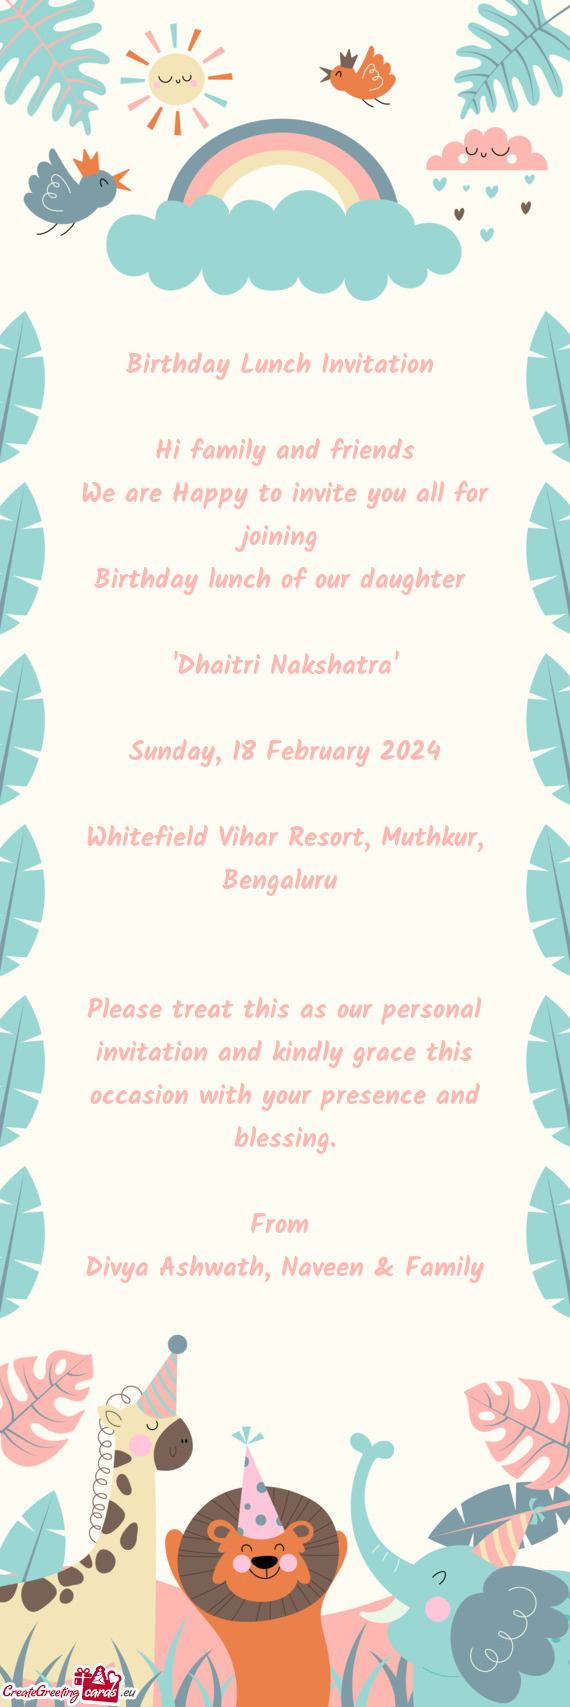 Birthday Lunch Invitation  Hi family and friends We are Happy to invite you all for joining Bi